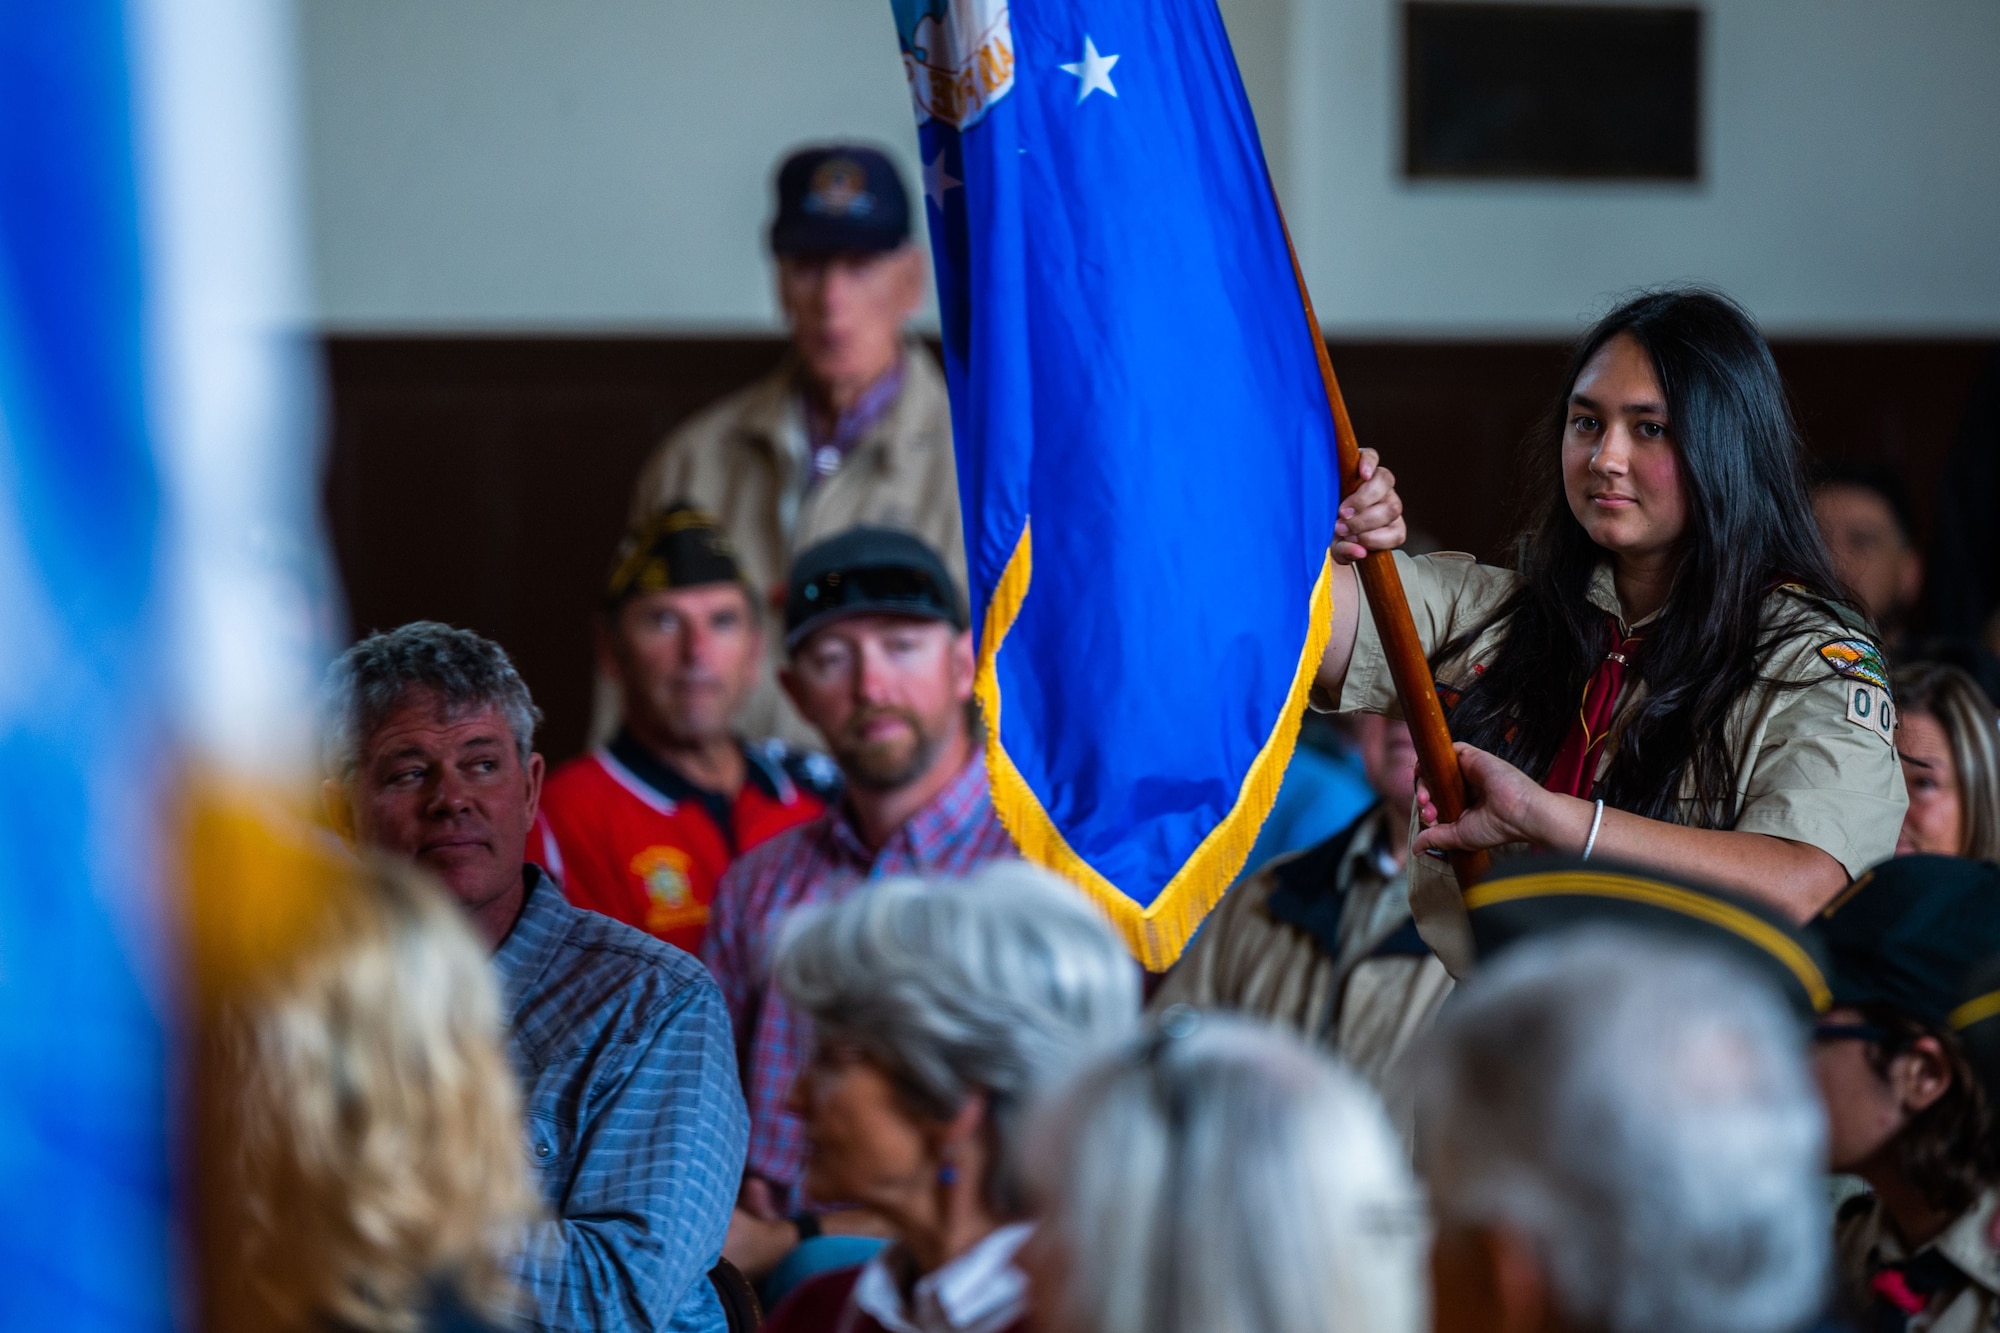 A member of a local scouts group carries the U.S. Air Force flag during a Memorial Day ceremony at the Solvang Veterans Memorial Hall in Solvang, Calif., May 29, 2023. U.S. Space Force Maj. Gen. Douglas A. Schiess, Combined Force Space Component Command commander, gave the keynote speech to over 200 attendees that included veterans from the Global War on Terrorism, Vietnam, Korea and even one veteran from WWII. The ceremony also included the raising on the American Flag by a local Cub Scouts group and a laying of a wreath with a Gold Star family member. (U.S. Space Force photo by Tech. Sgt. Luke Kitterman)